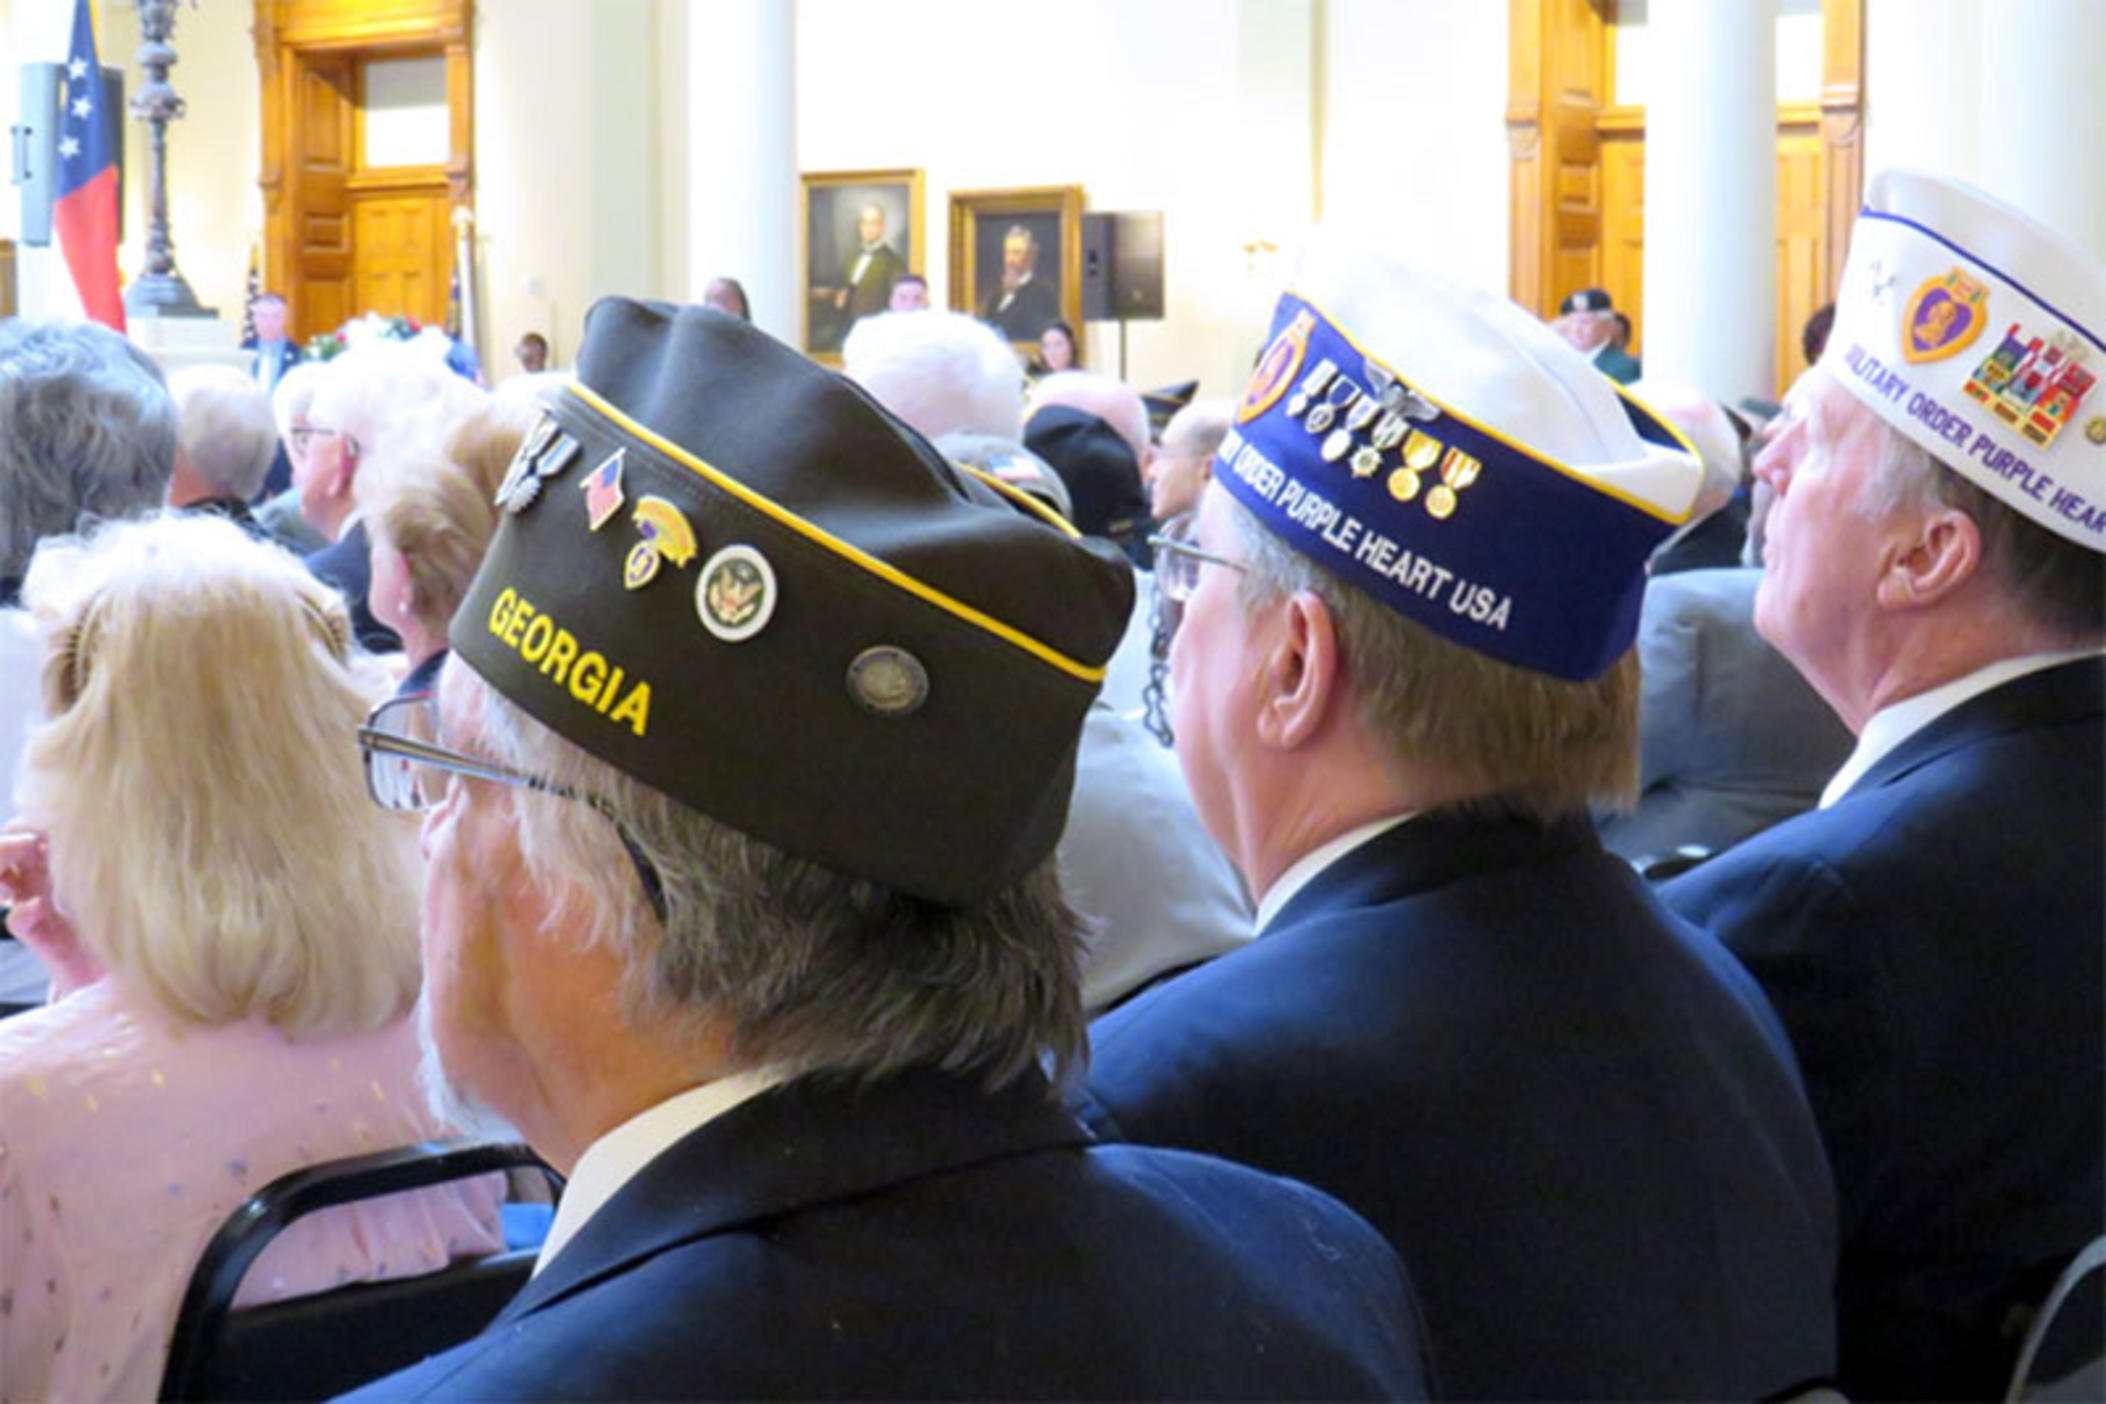 Veteran representatives from the American Legion and Purple Heart observe a Veterans Day celebration at the state capitol.